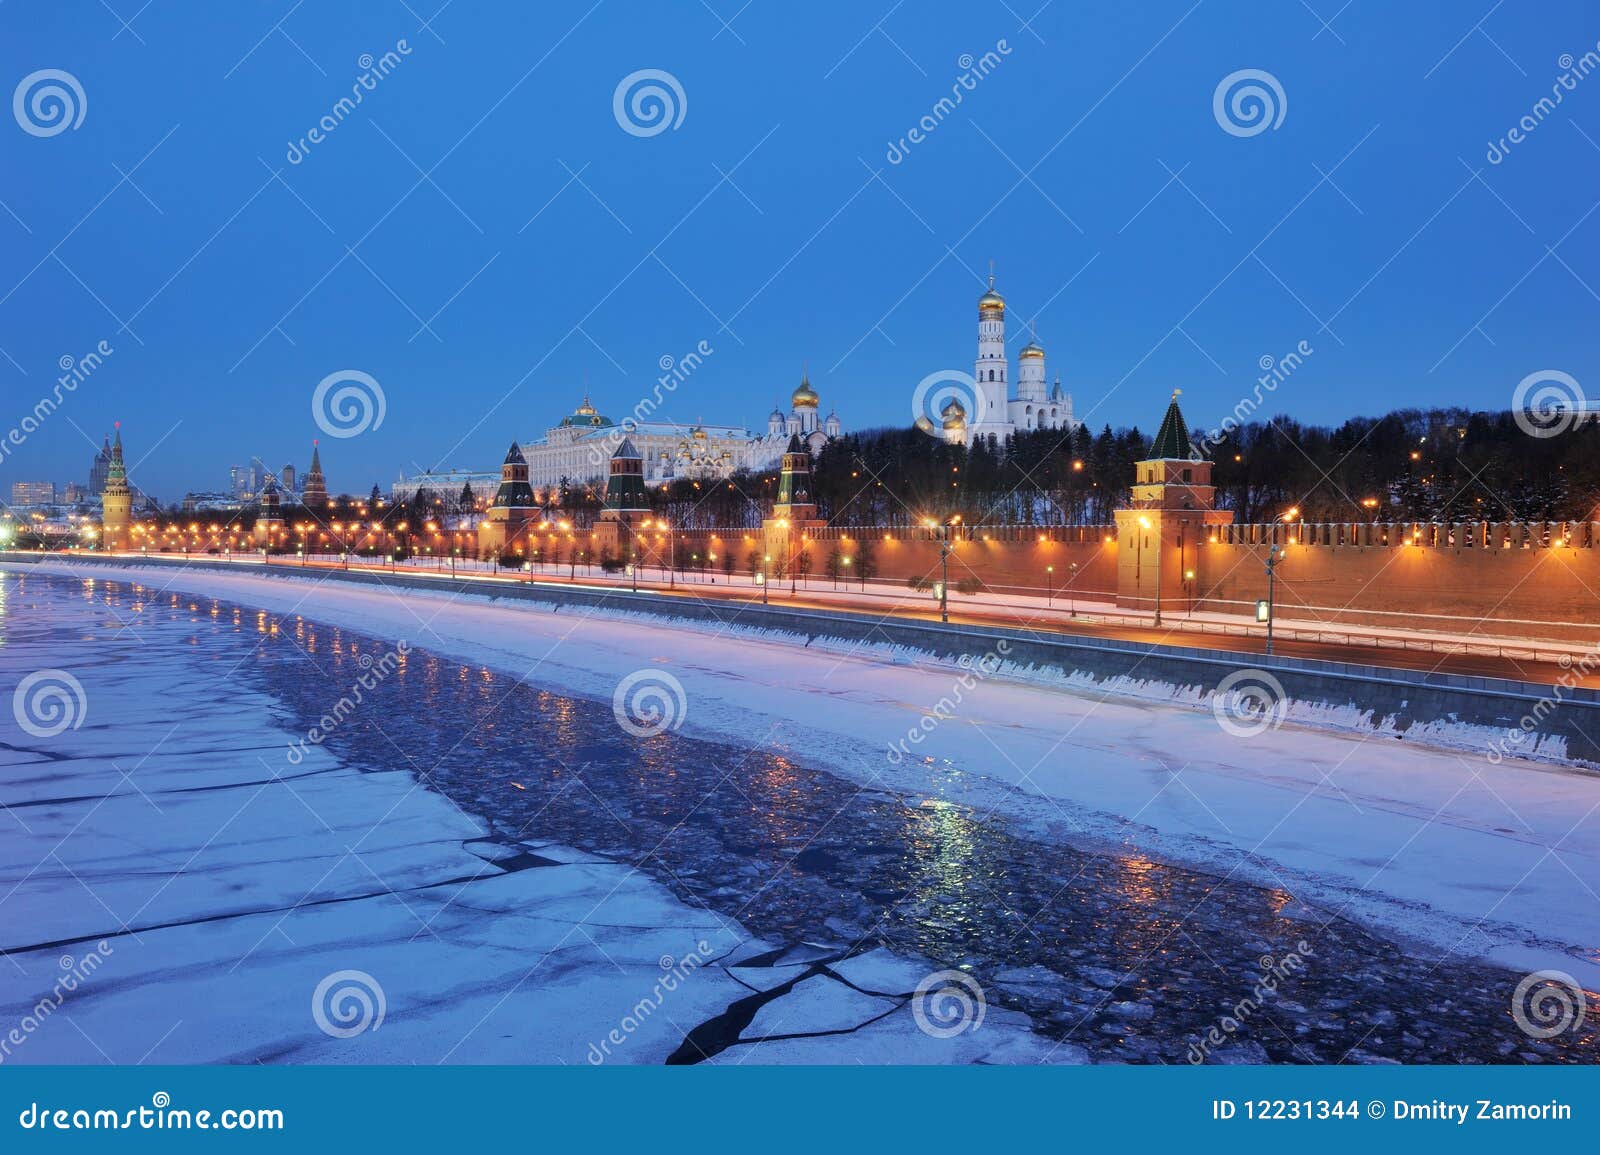 russia. ensemble of moscow kremlin view at night